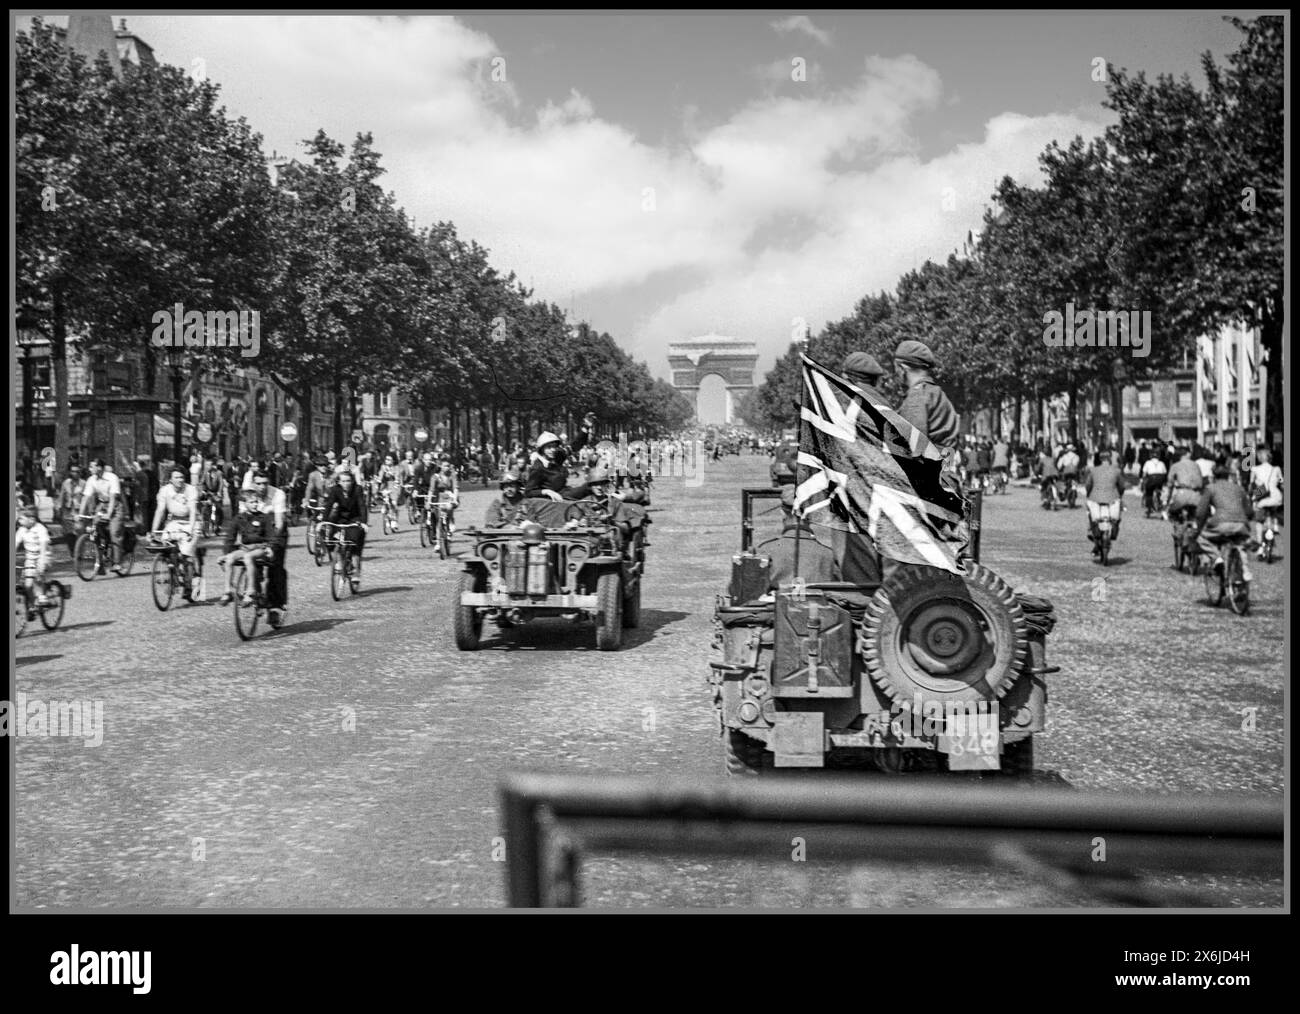 1944 LIBERATION OF PARIS WW2 An army film and photographic unit with large Union Jack flag drive up the Champs Elysees with Arc de Triomphe behind  Paris France 26th August 1944 Stock Photo